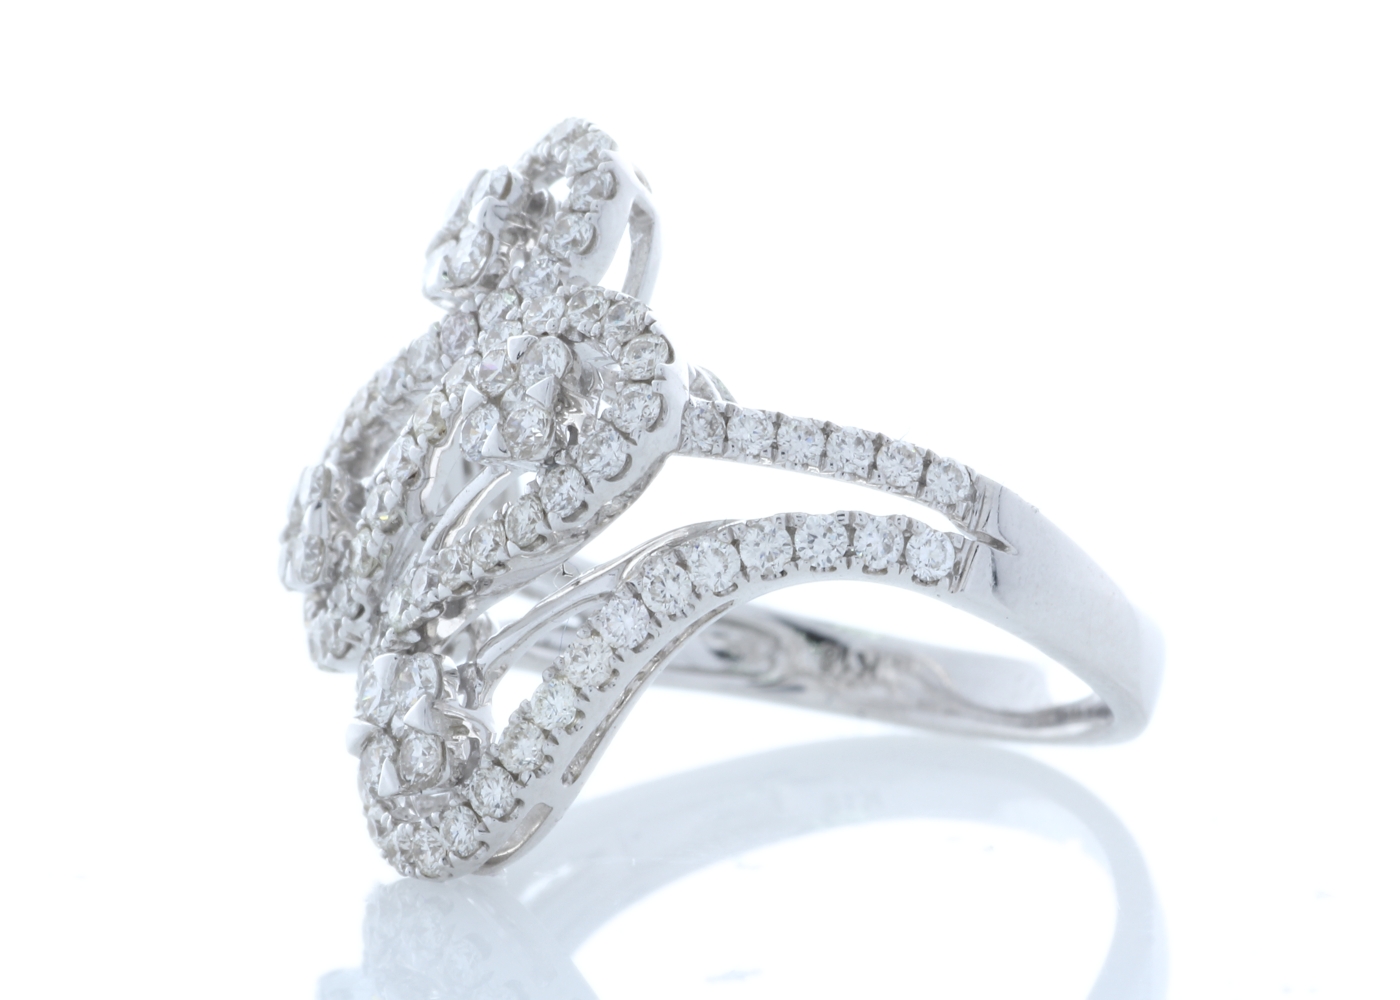 18ct White Gold Fancy Cluster Diamond Ring 1.15 Carats - Image 2 of 5